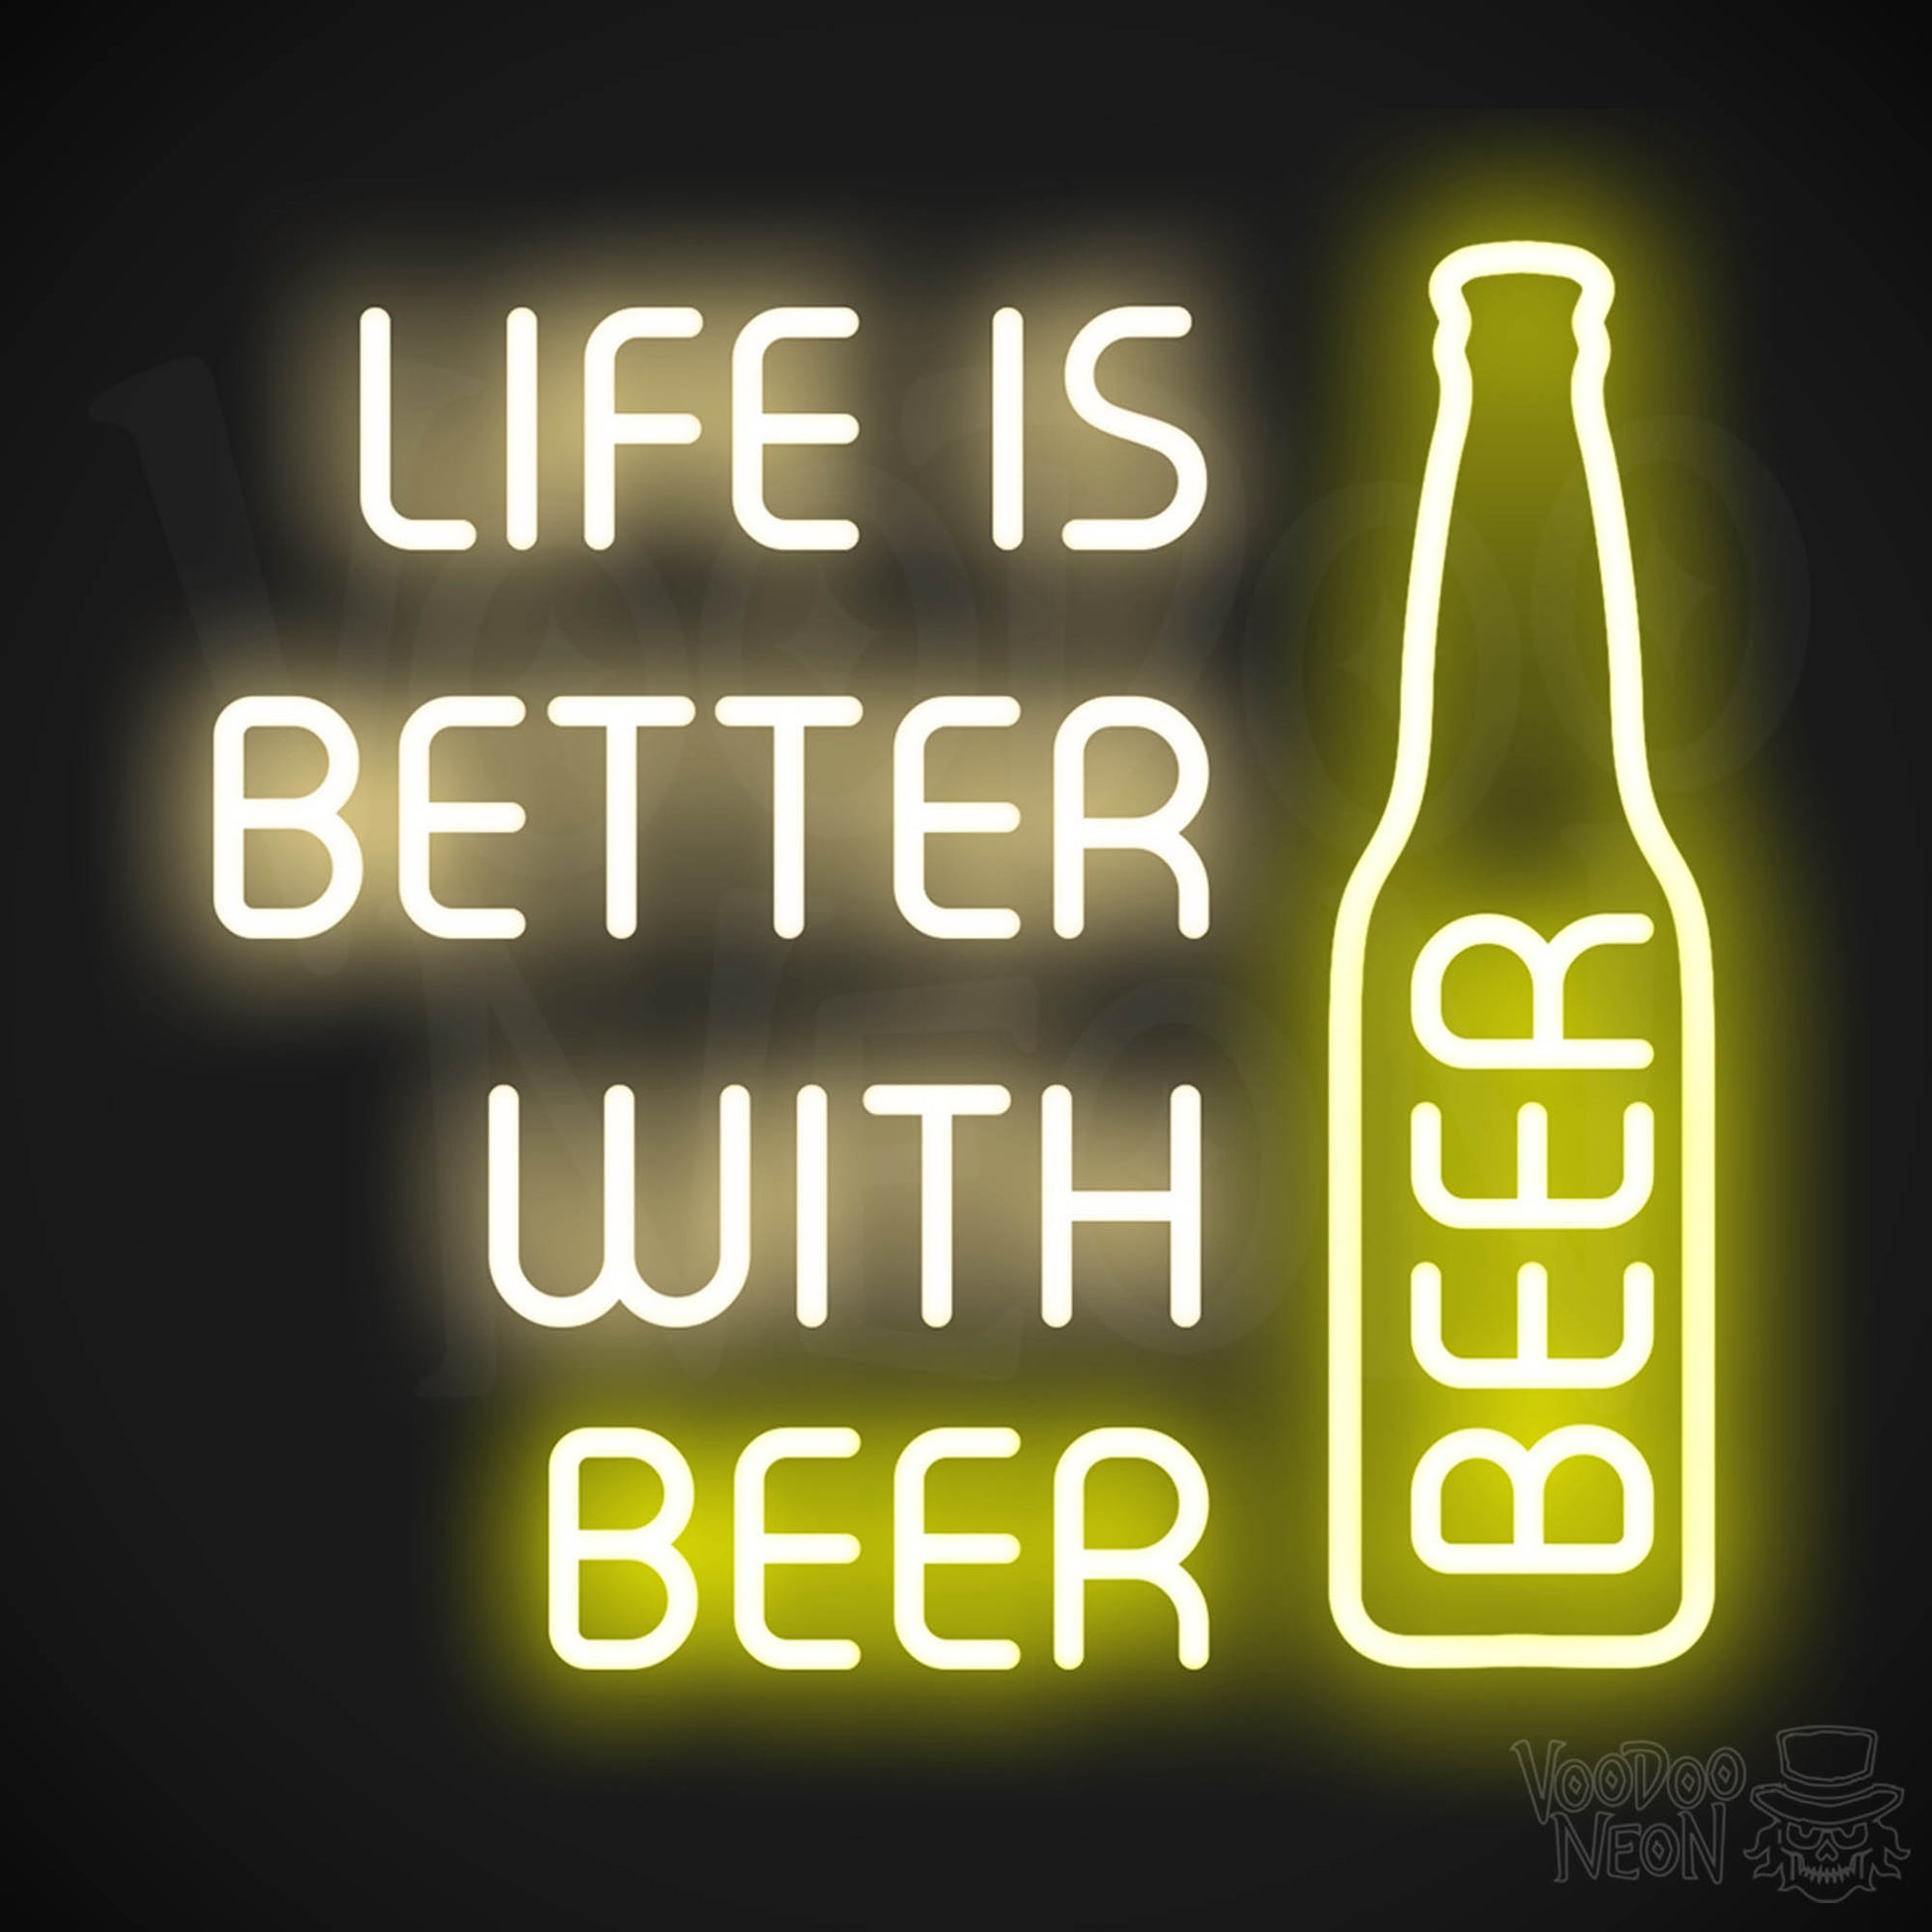 Life Is Better With Beer LED Neon - Multi-Color